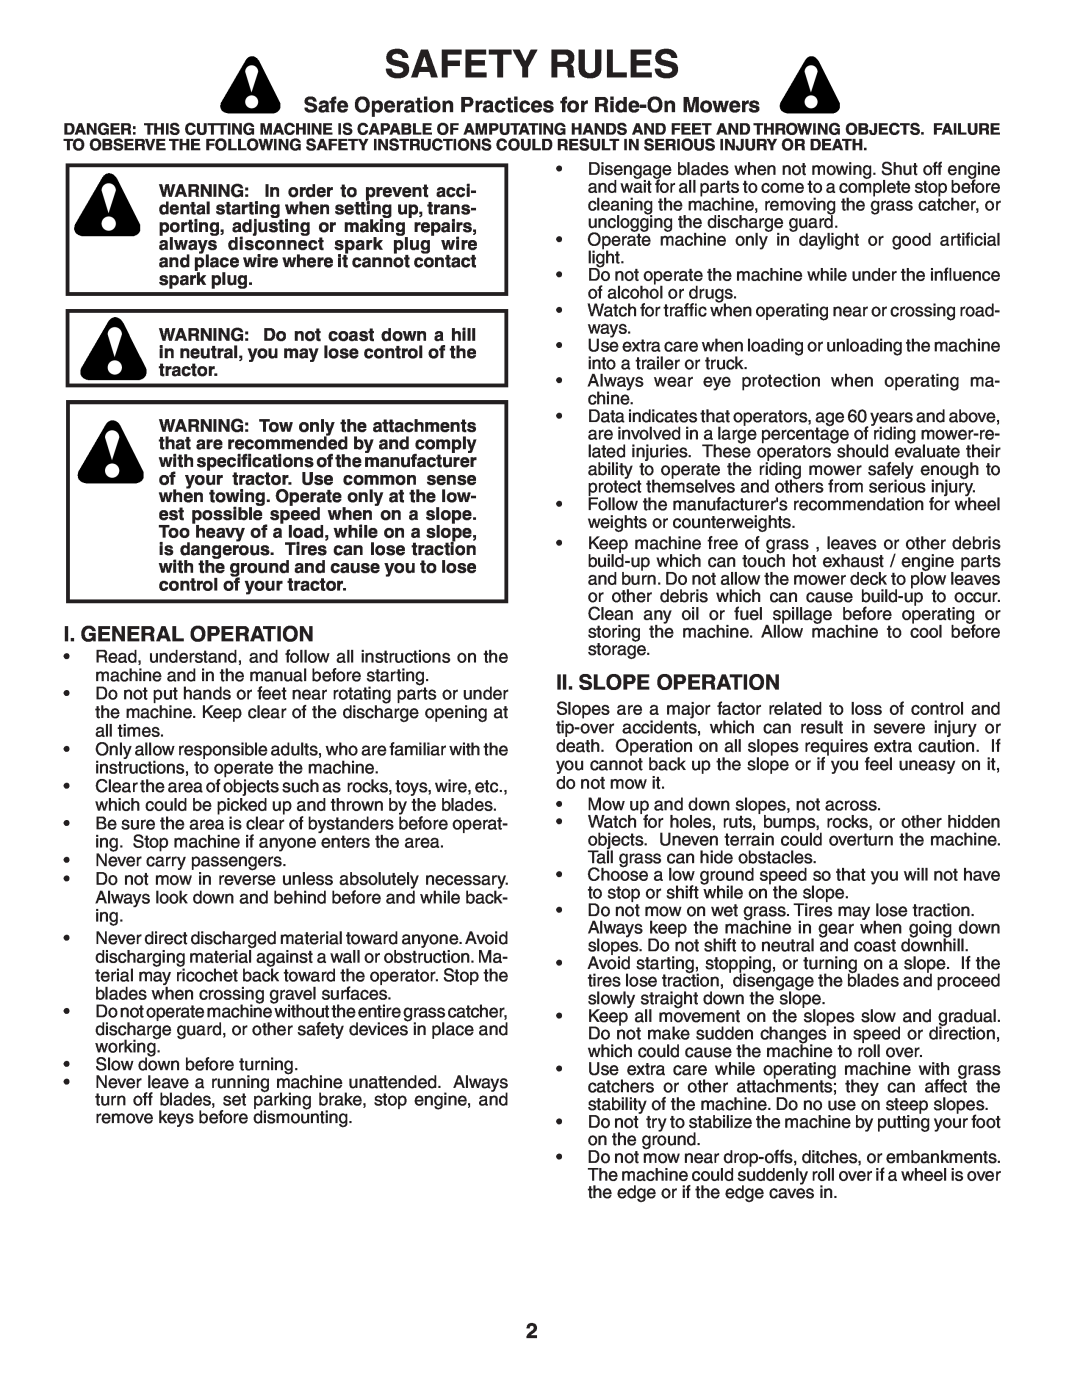 Weed Eater 60614 manual Safety Rules, Safe Operation Practices for Ride-OnMowers, I. General Operation, Ii. Slope Operation 